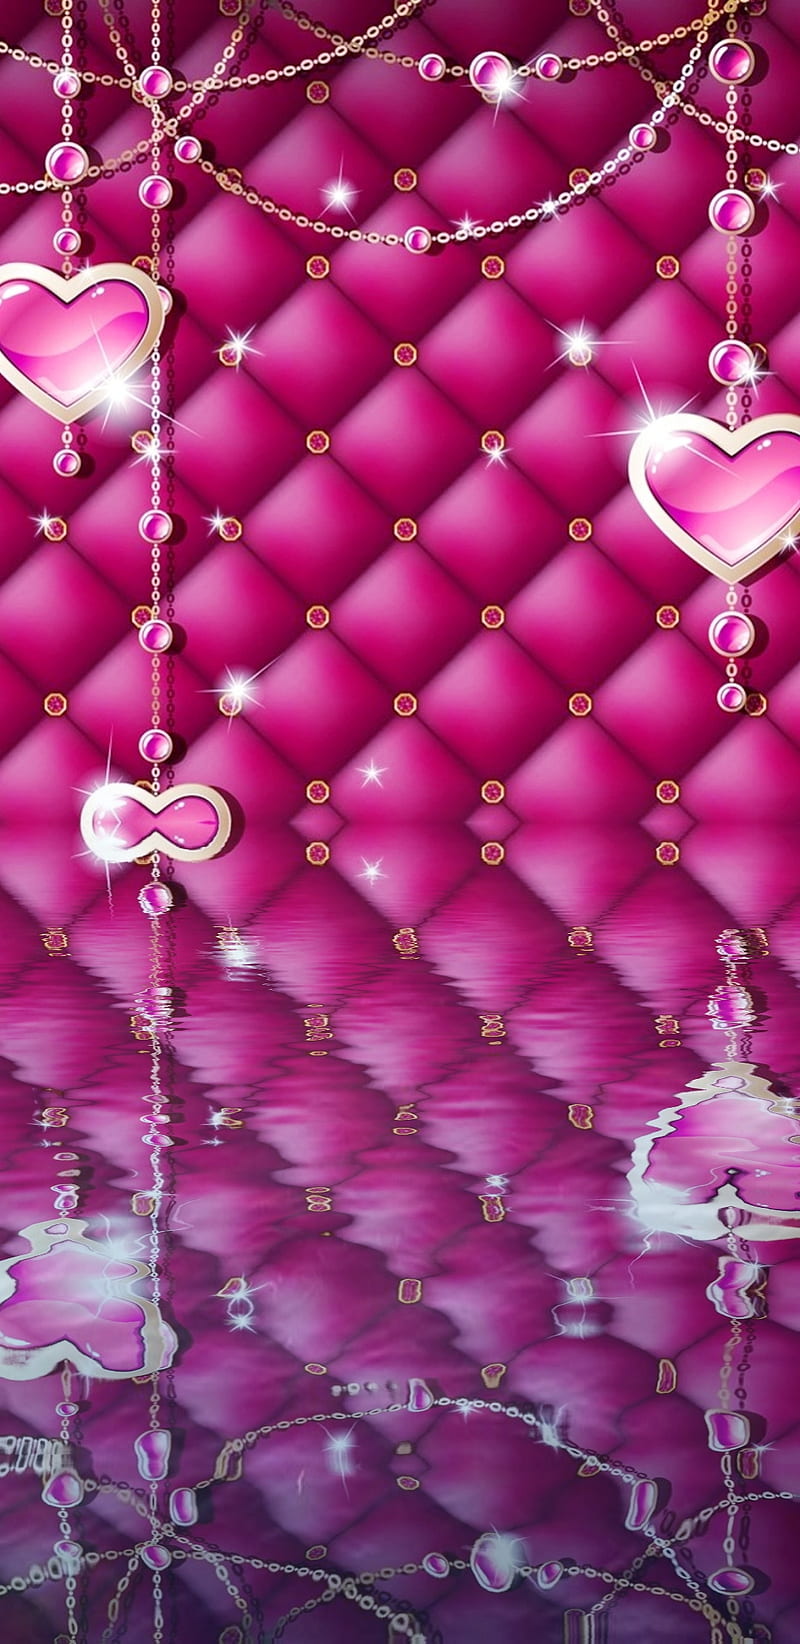 Water Effect, girly, corazones, love, pink, pretty, sparkle, HD phone wallpaper